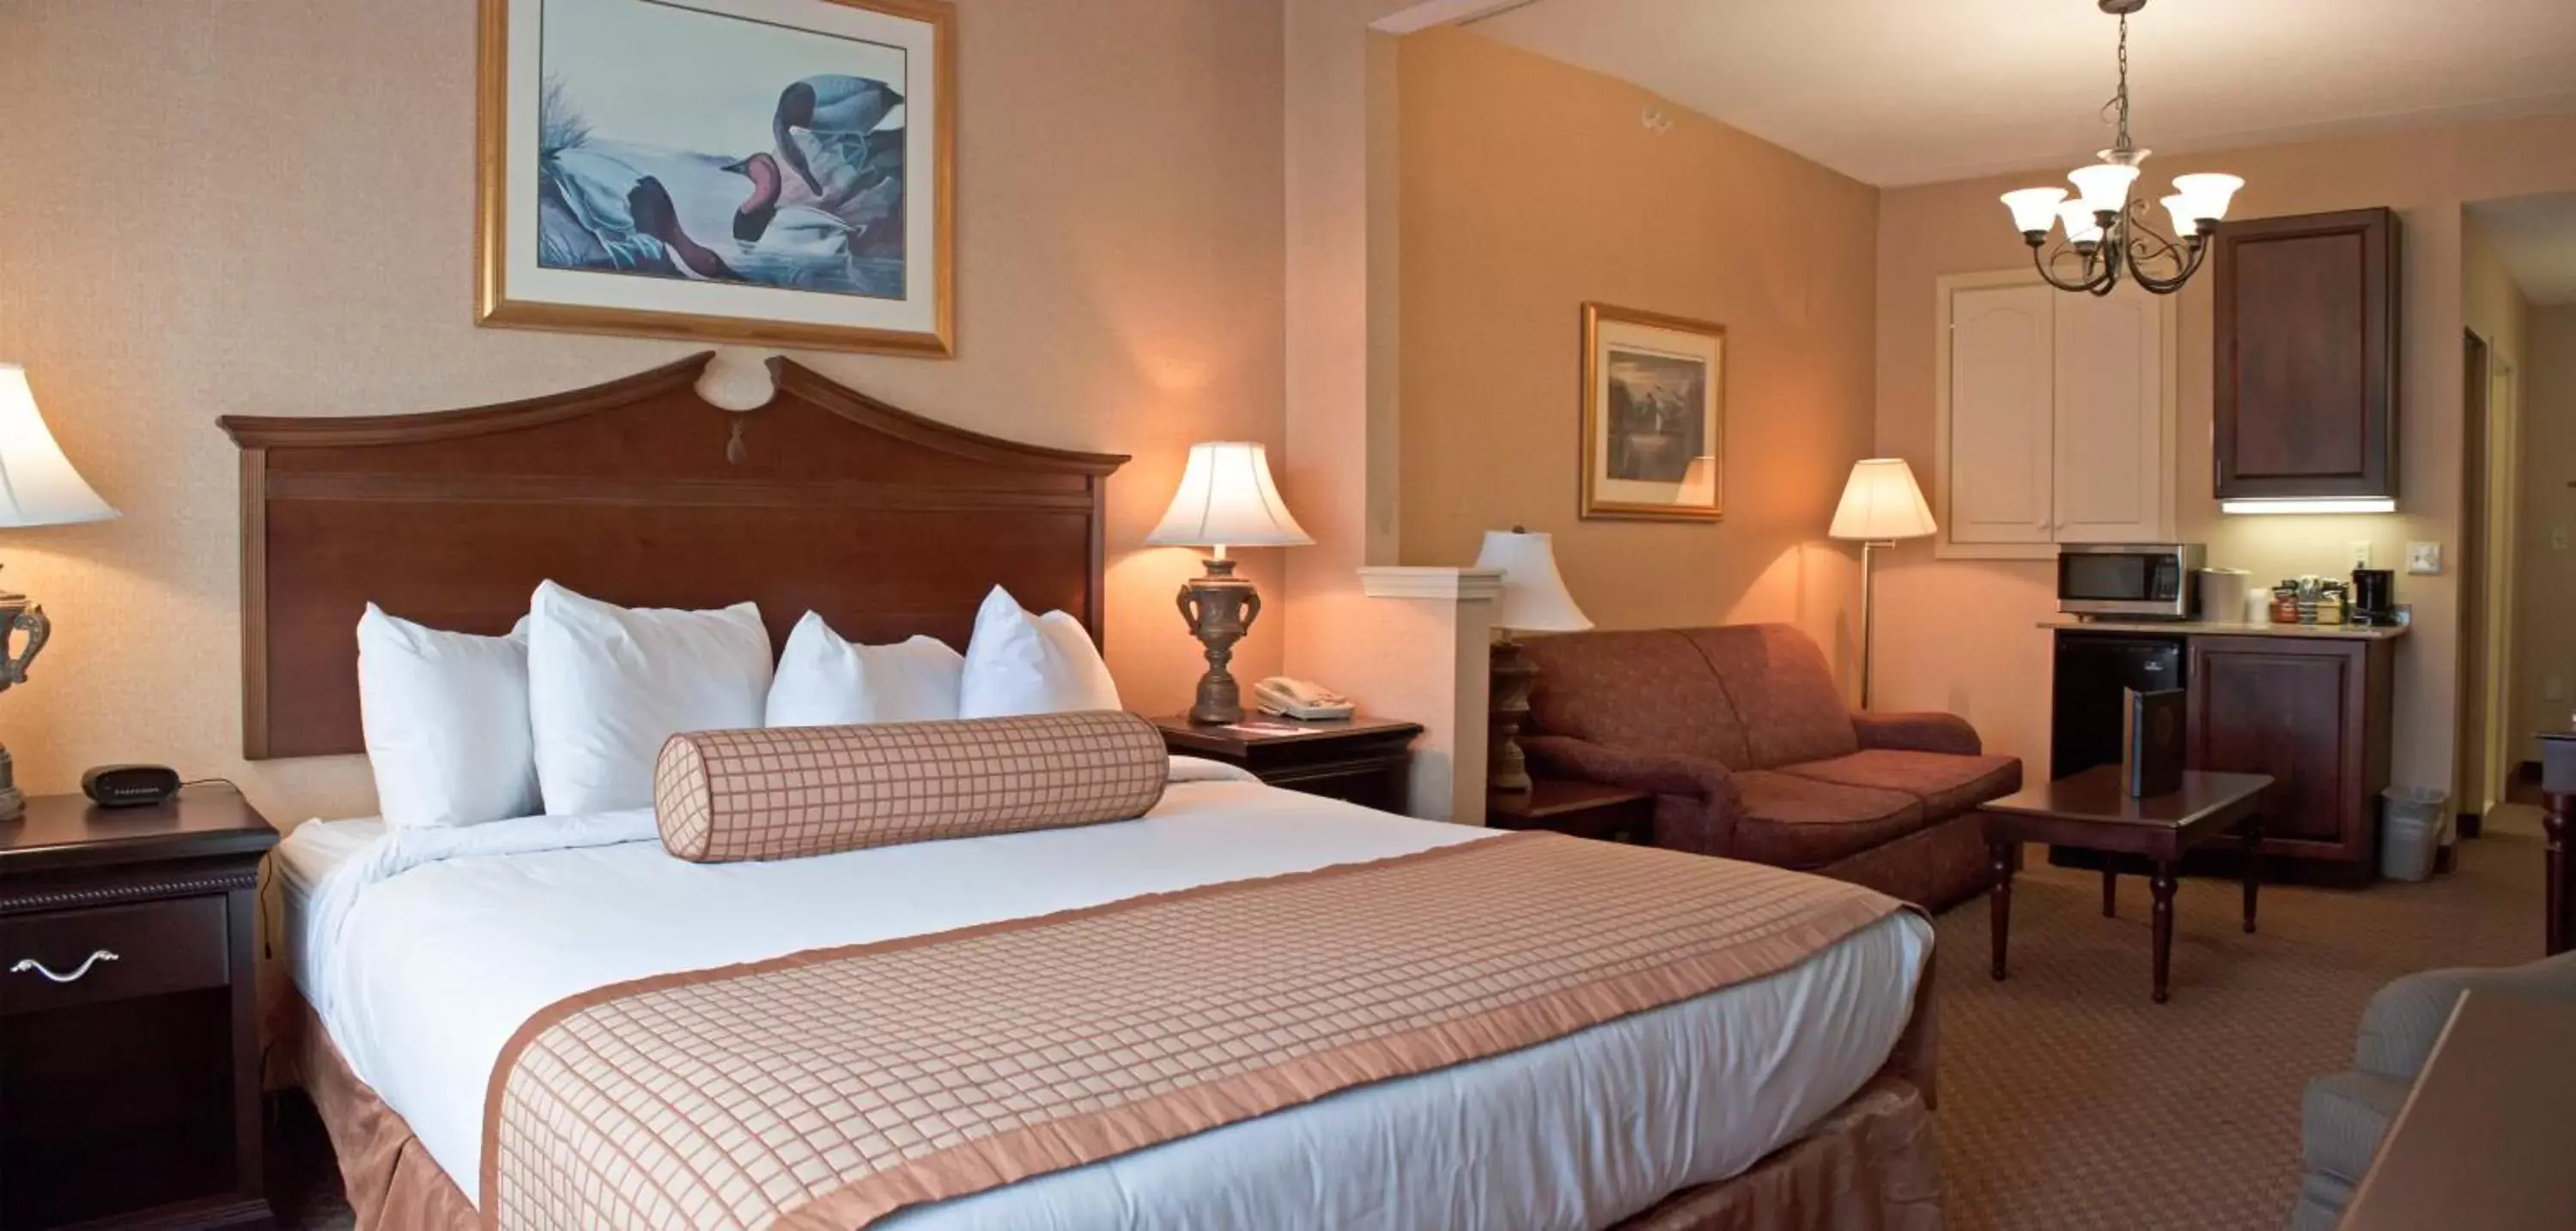 Golfcourse, Bed in Fort William Henry Hotel